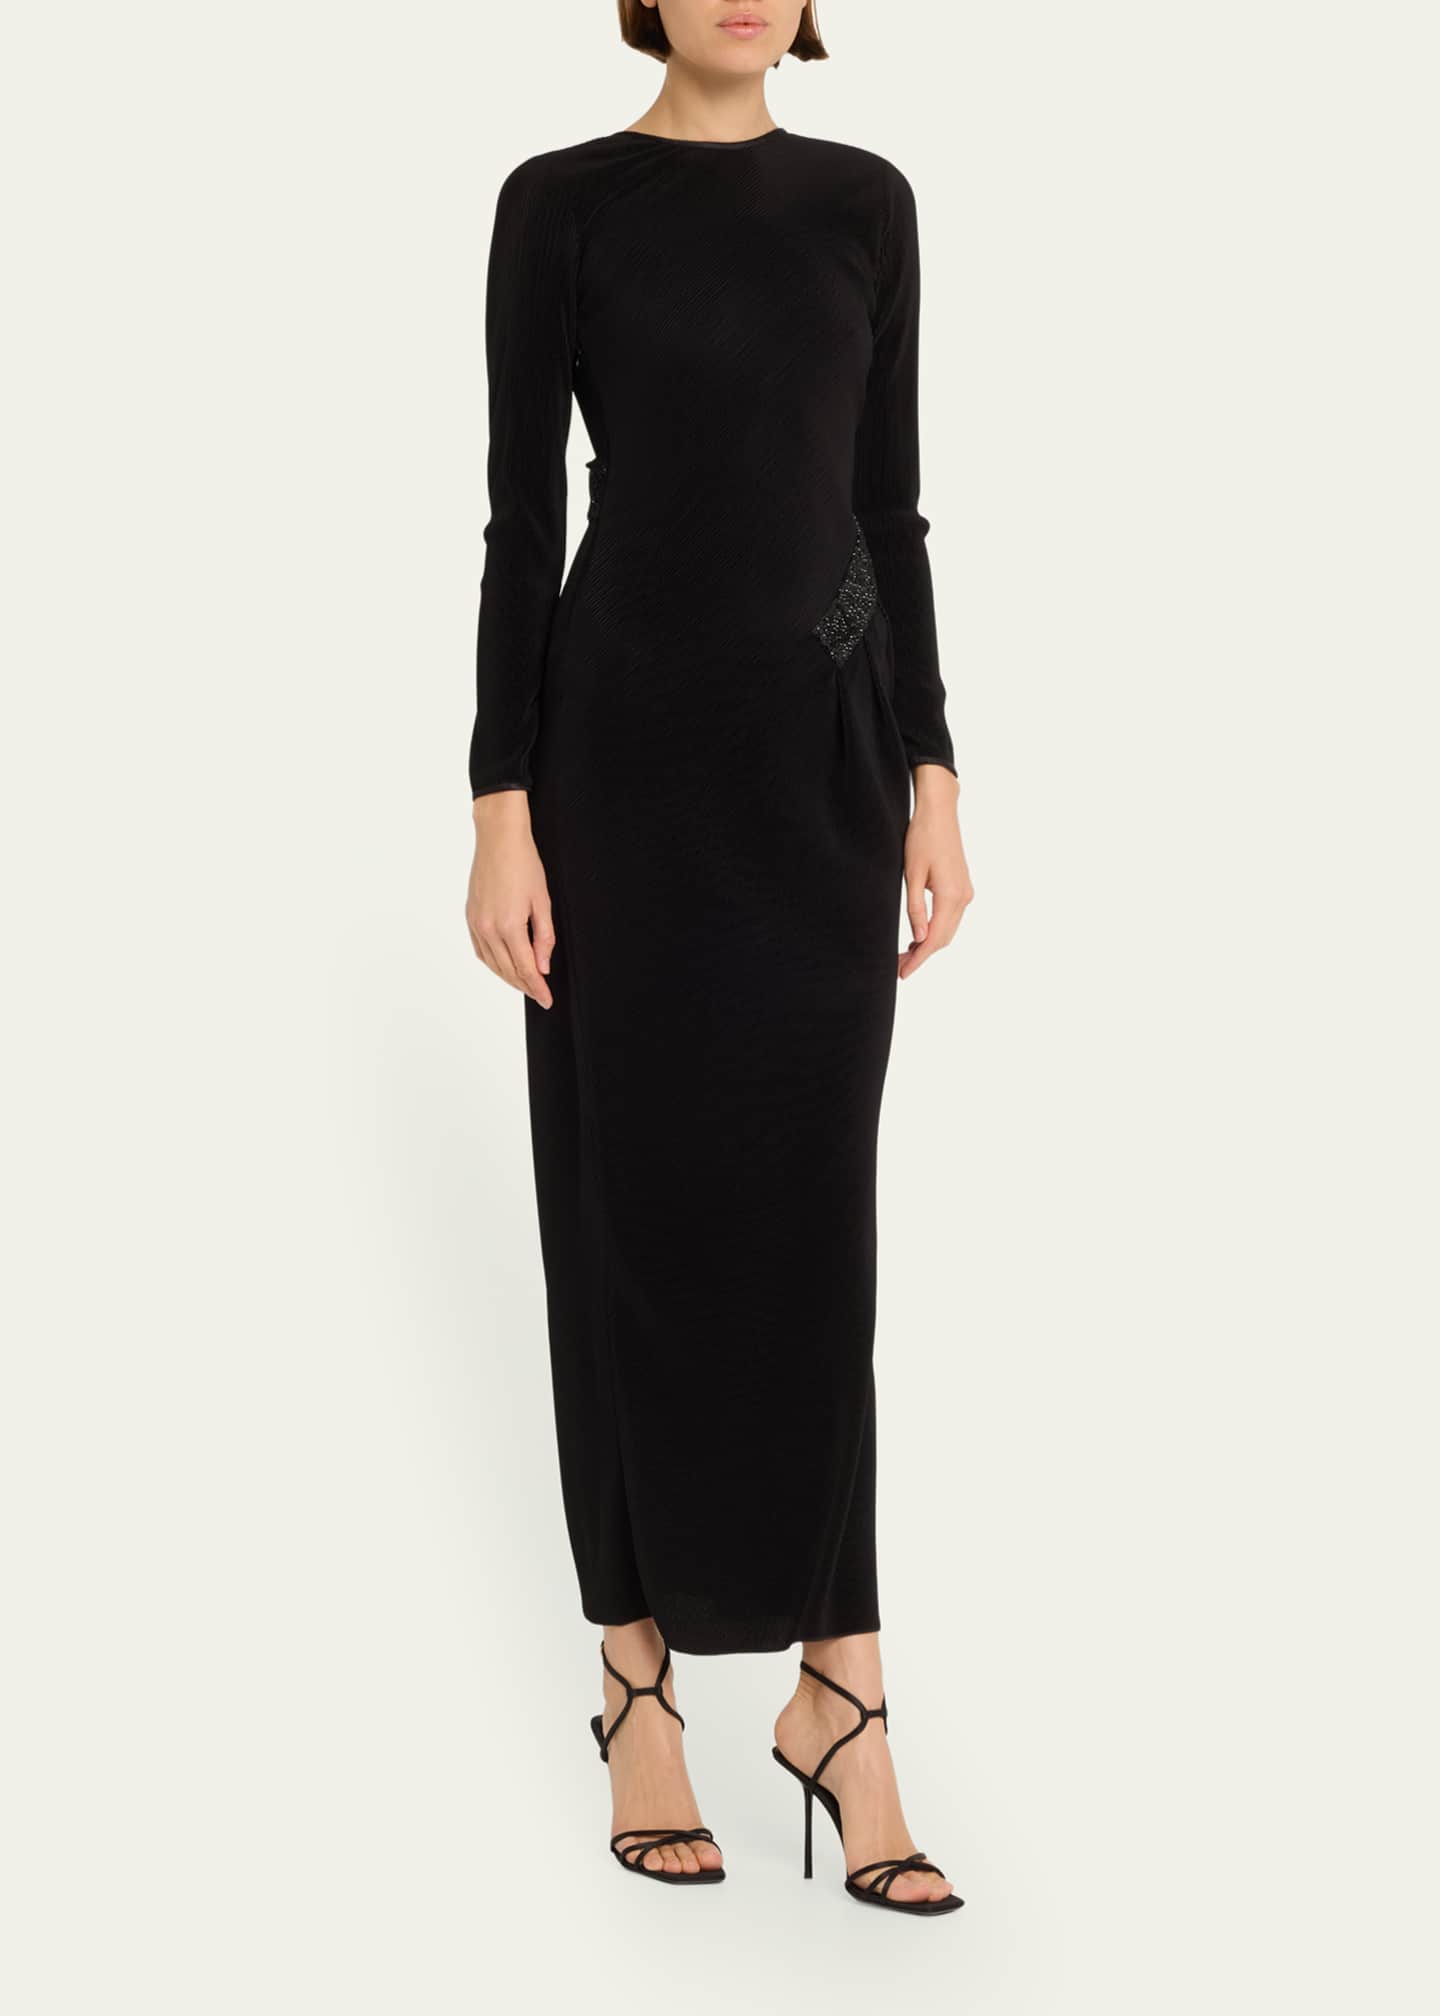 Giorgio Armani Plisse Jersey Gown with Beaded Hip Detail - Bergdorf Goodman